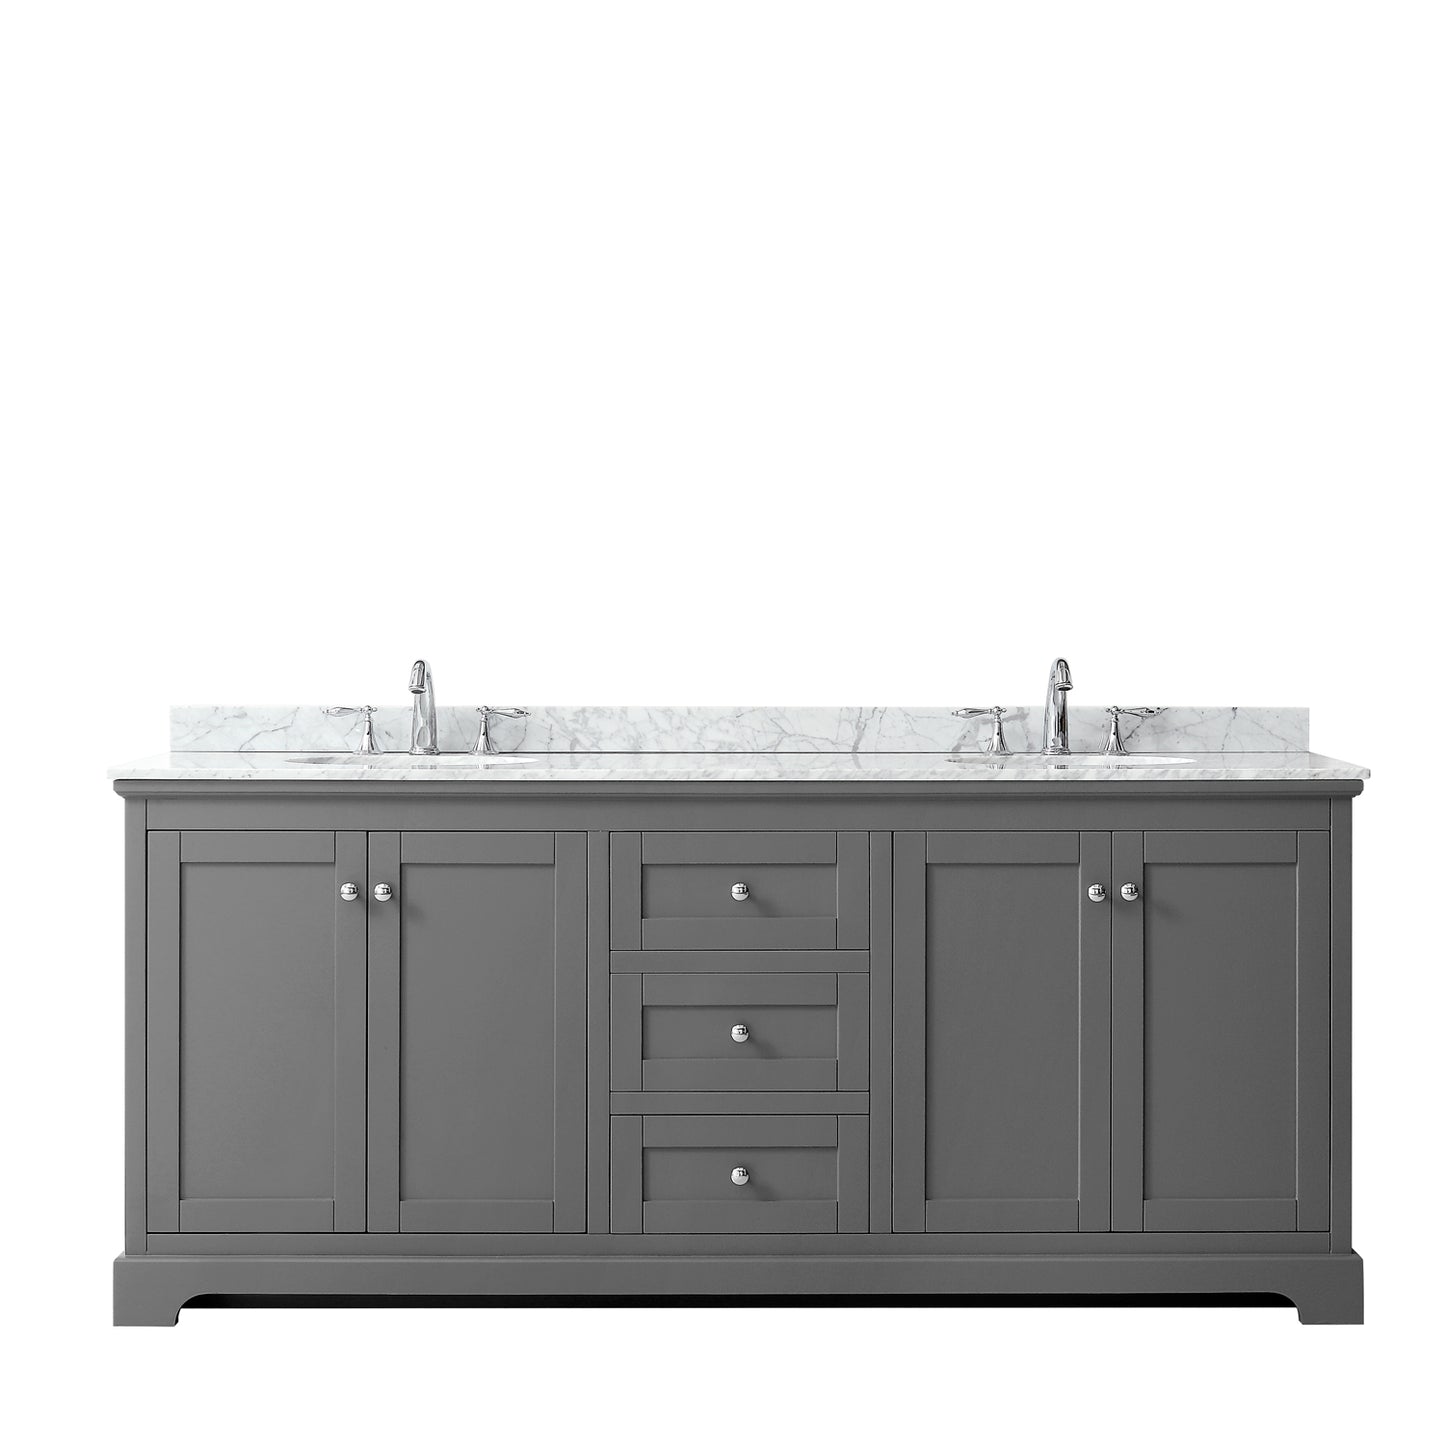 80 Inch Double Bathroom Vanity, White Carrara Marble Countertop, Undermount Oval Sinks, and No Mirror - Luxe Bathroom Vanities Luxury Bathroom Fixtures Bathroom Furniture